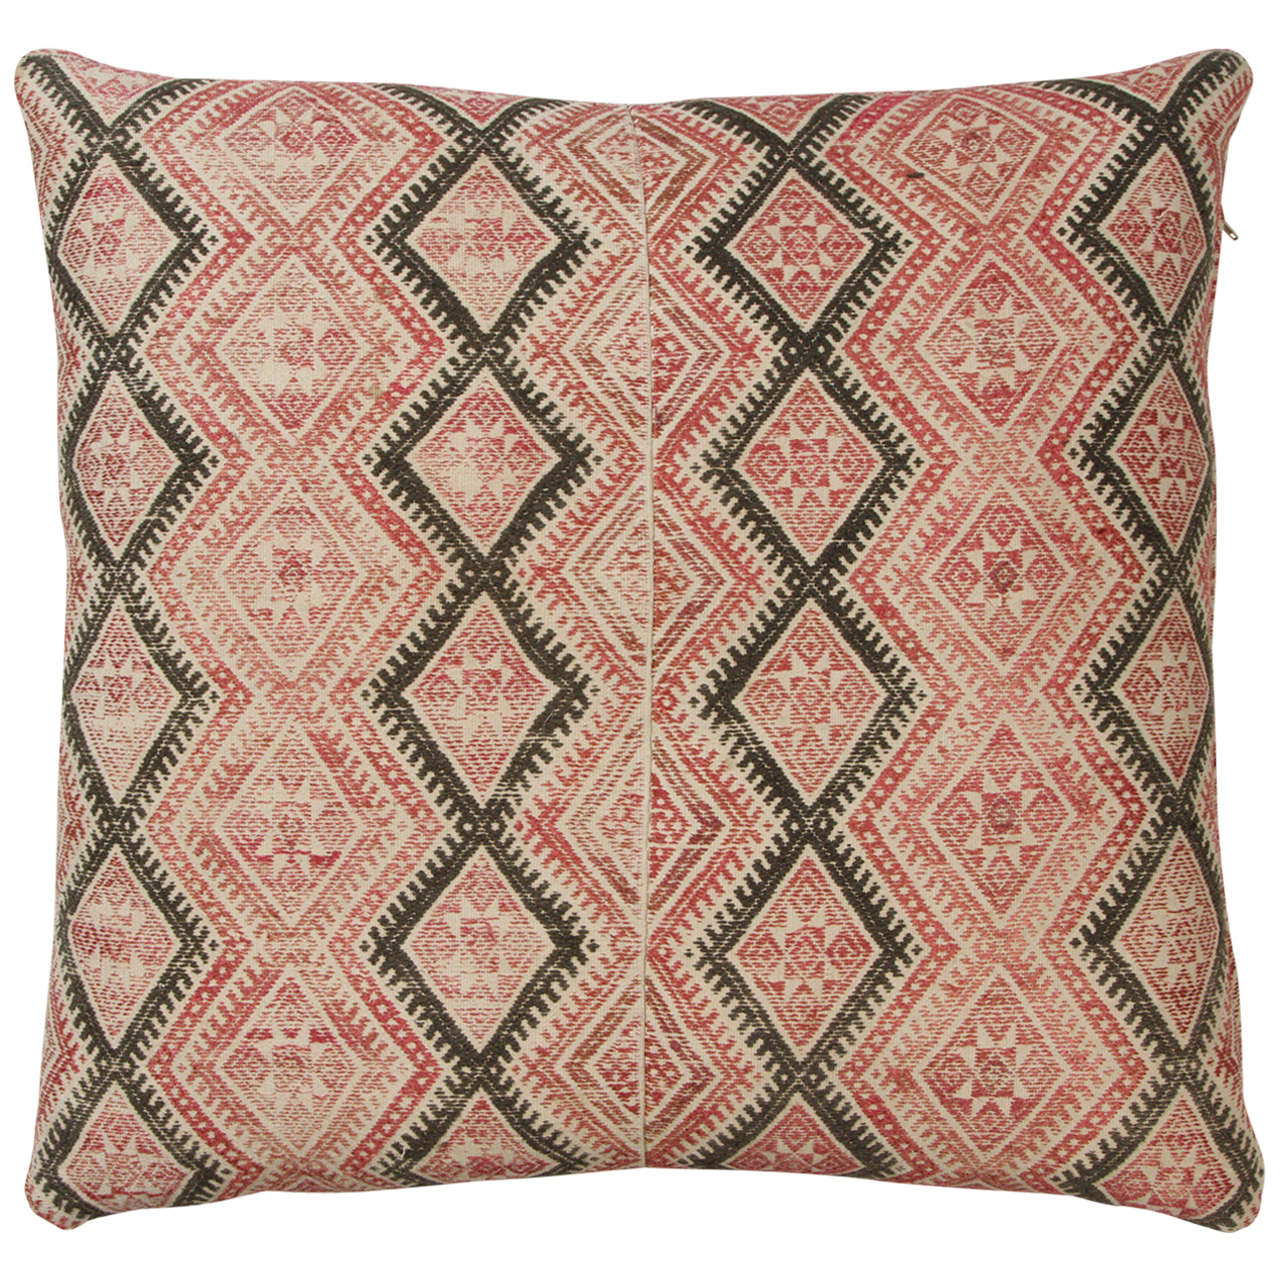 Chinese Hill Tribe Pillow